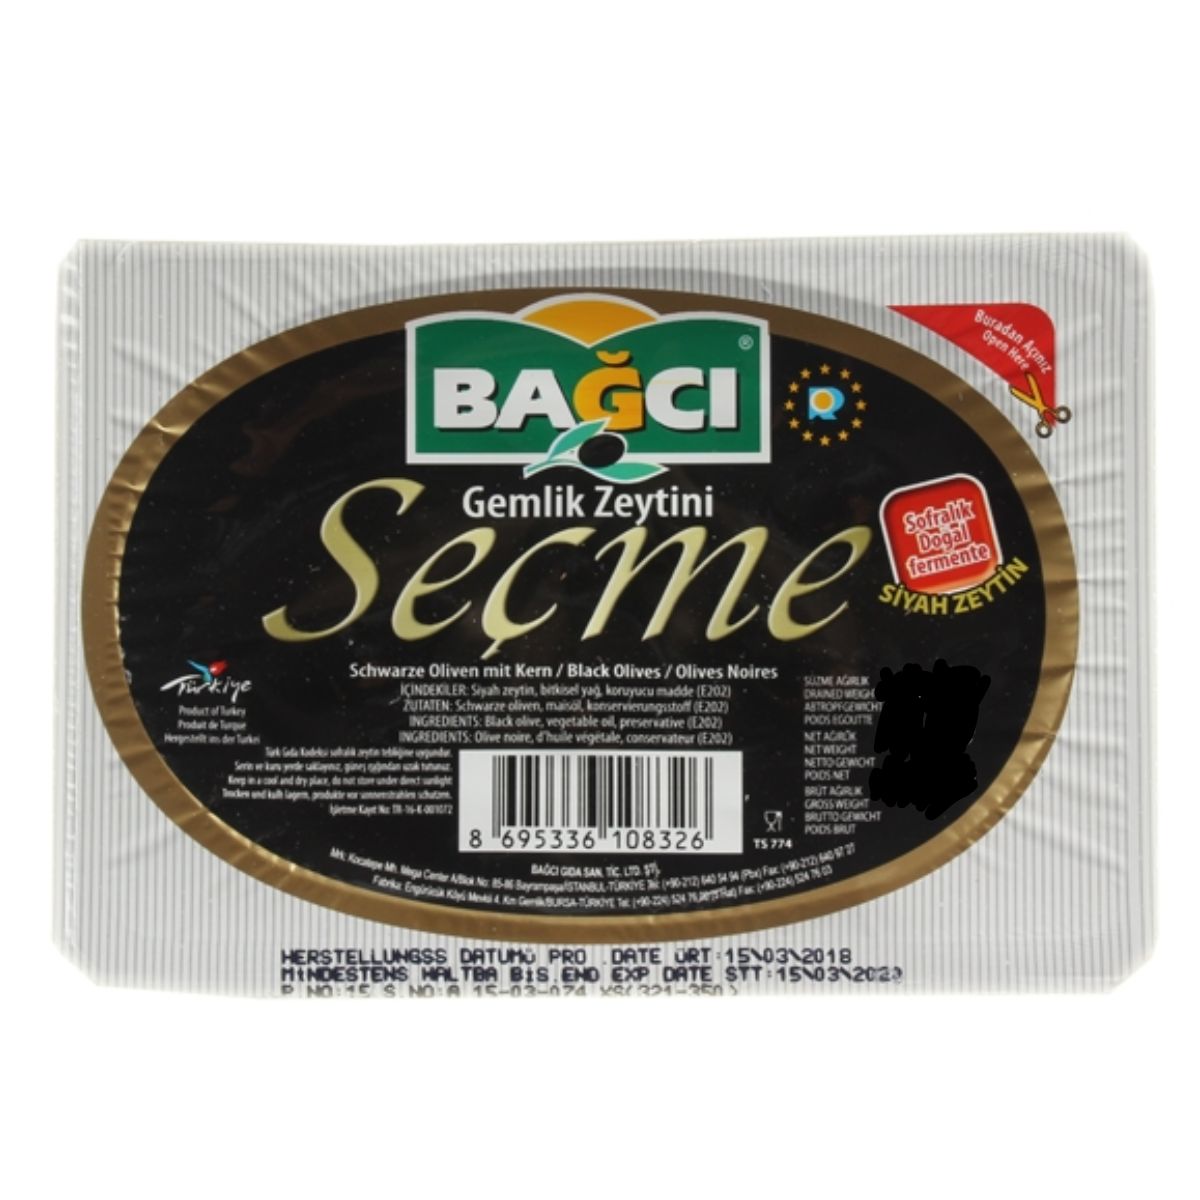 A package of Bagci - Black Olives - 400g on a white background.